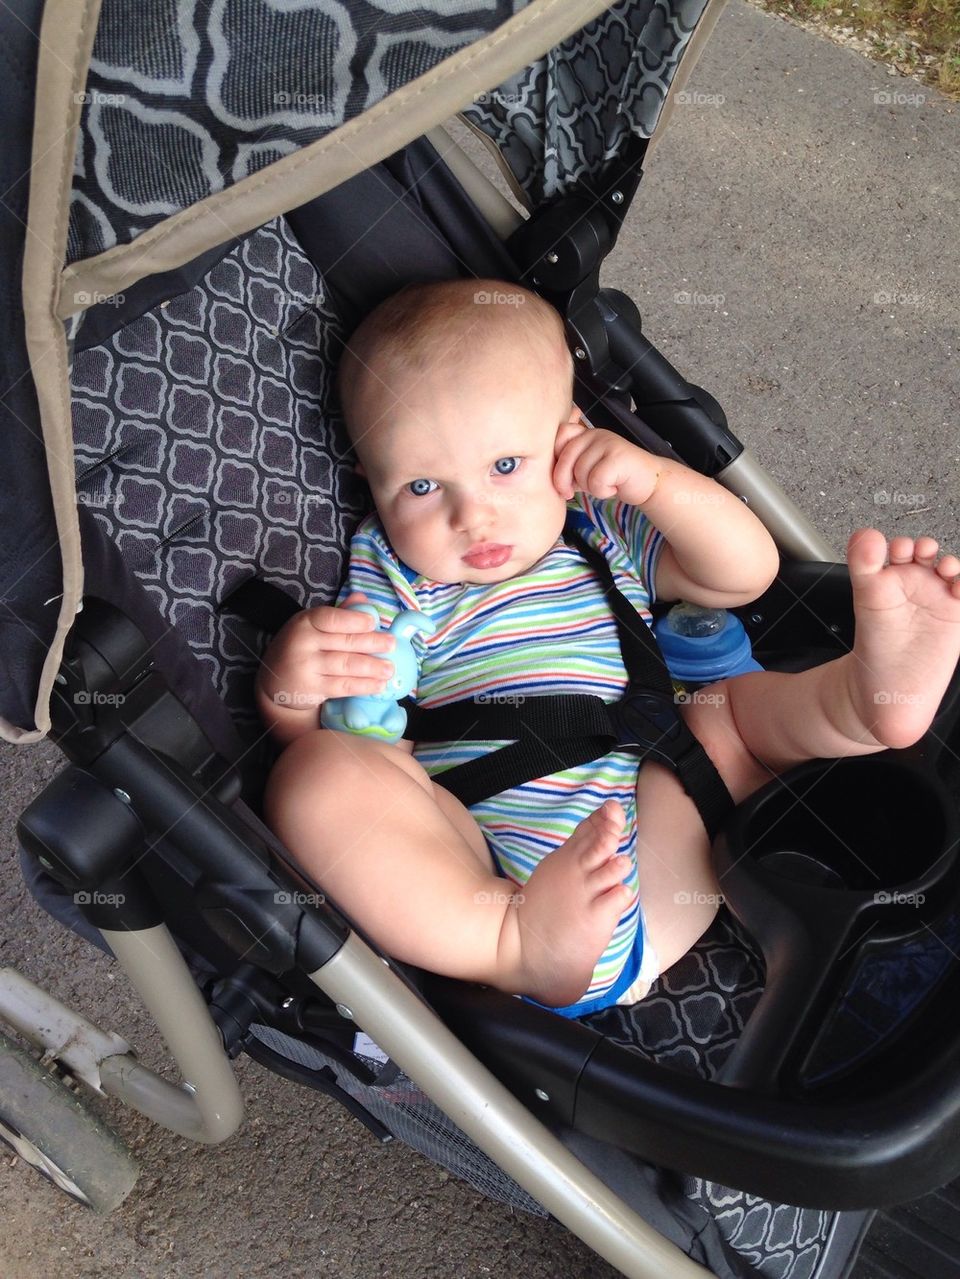 Baby in the stroller chillin!